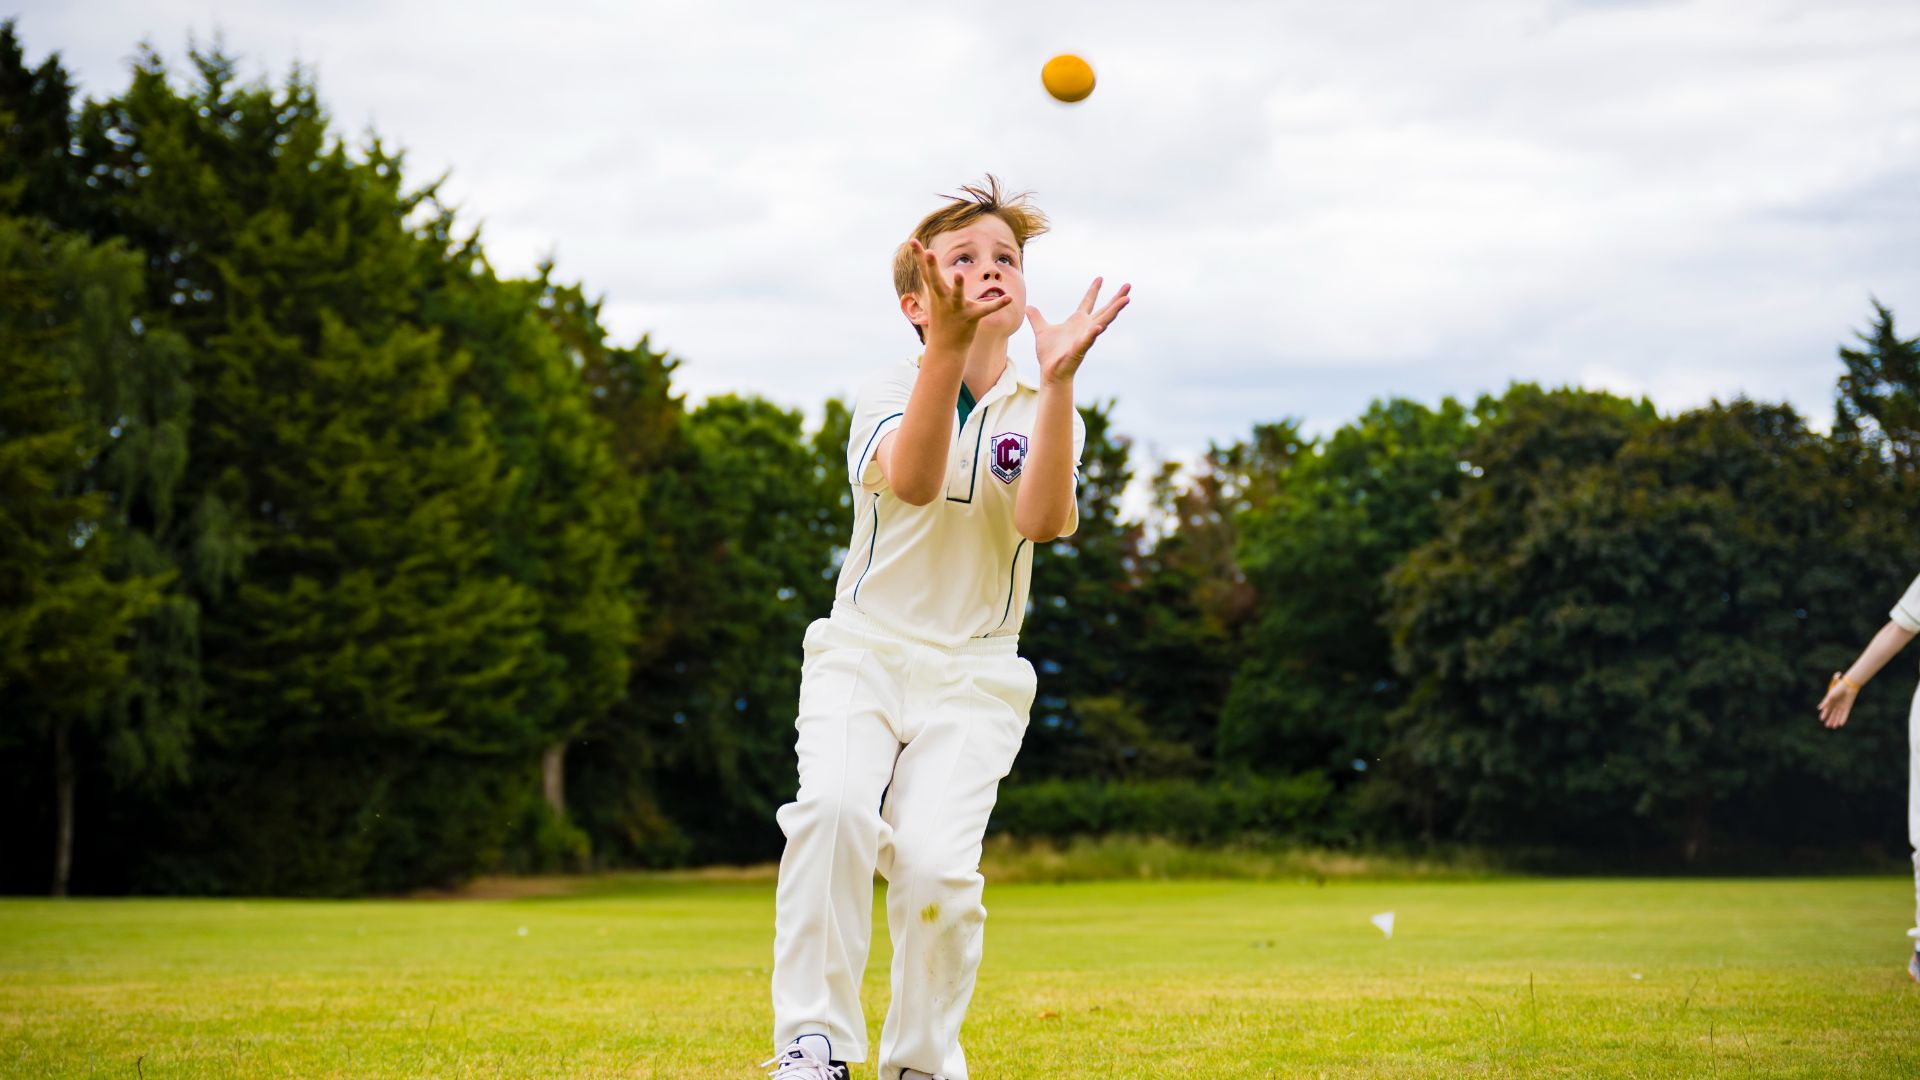 photo of claires court junior boy pupil playin cricket outside